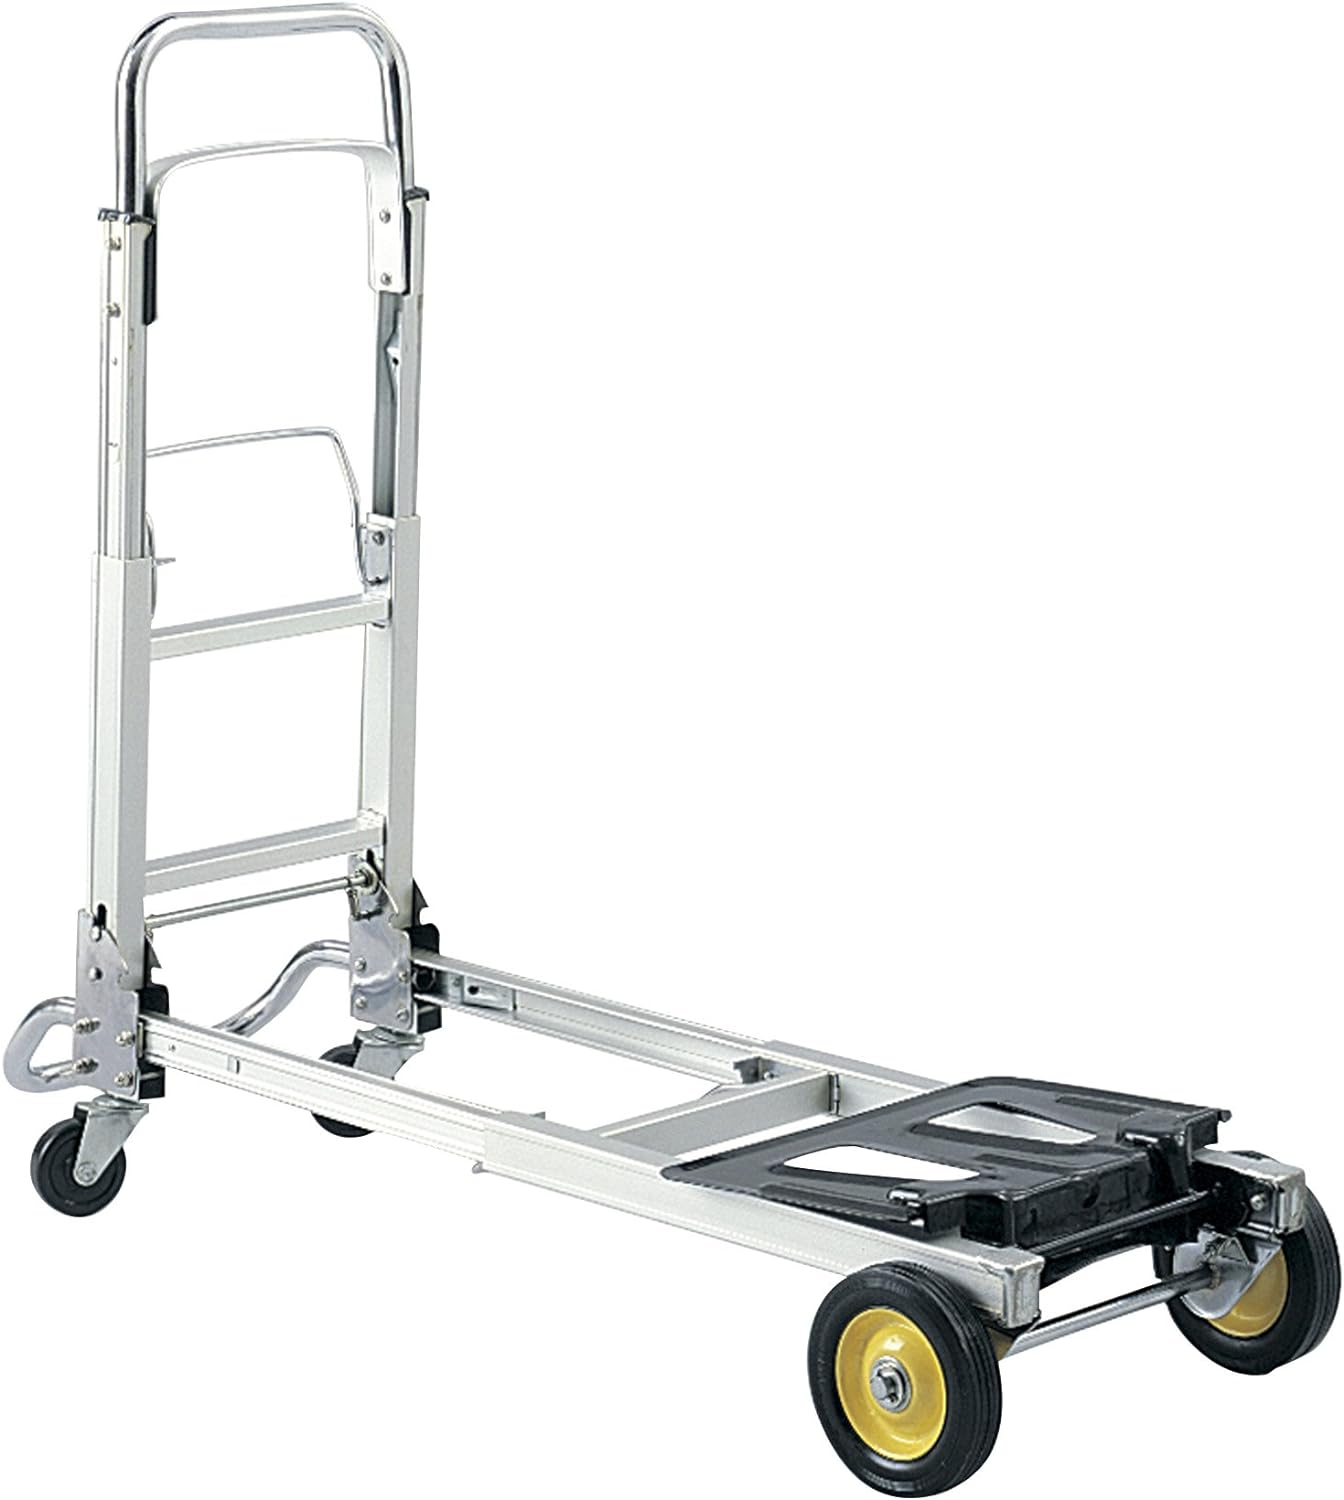 Safco Products Hide-Away Convertible Hand Truck, Dual Function, 400 lbs. Total Capacity, Aluminum Frame $87.94 Amazon